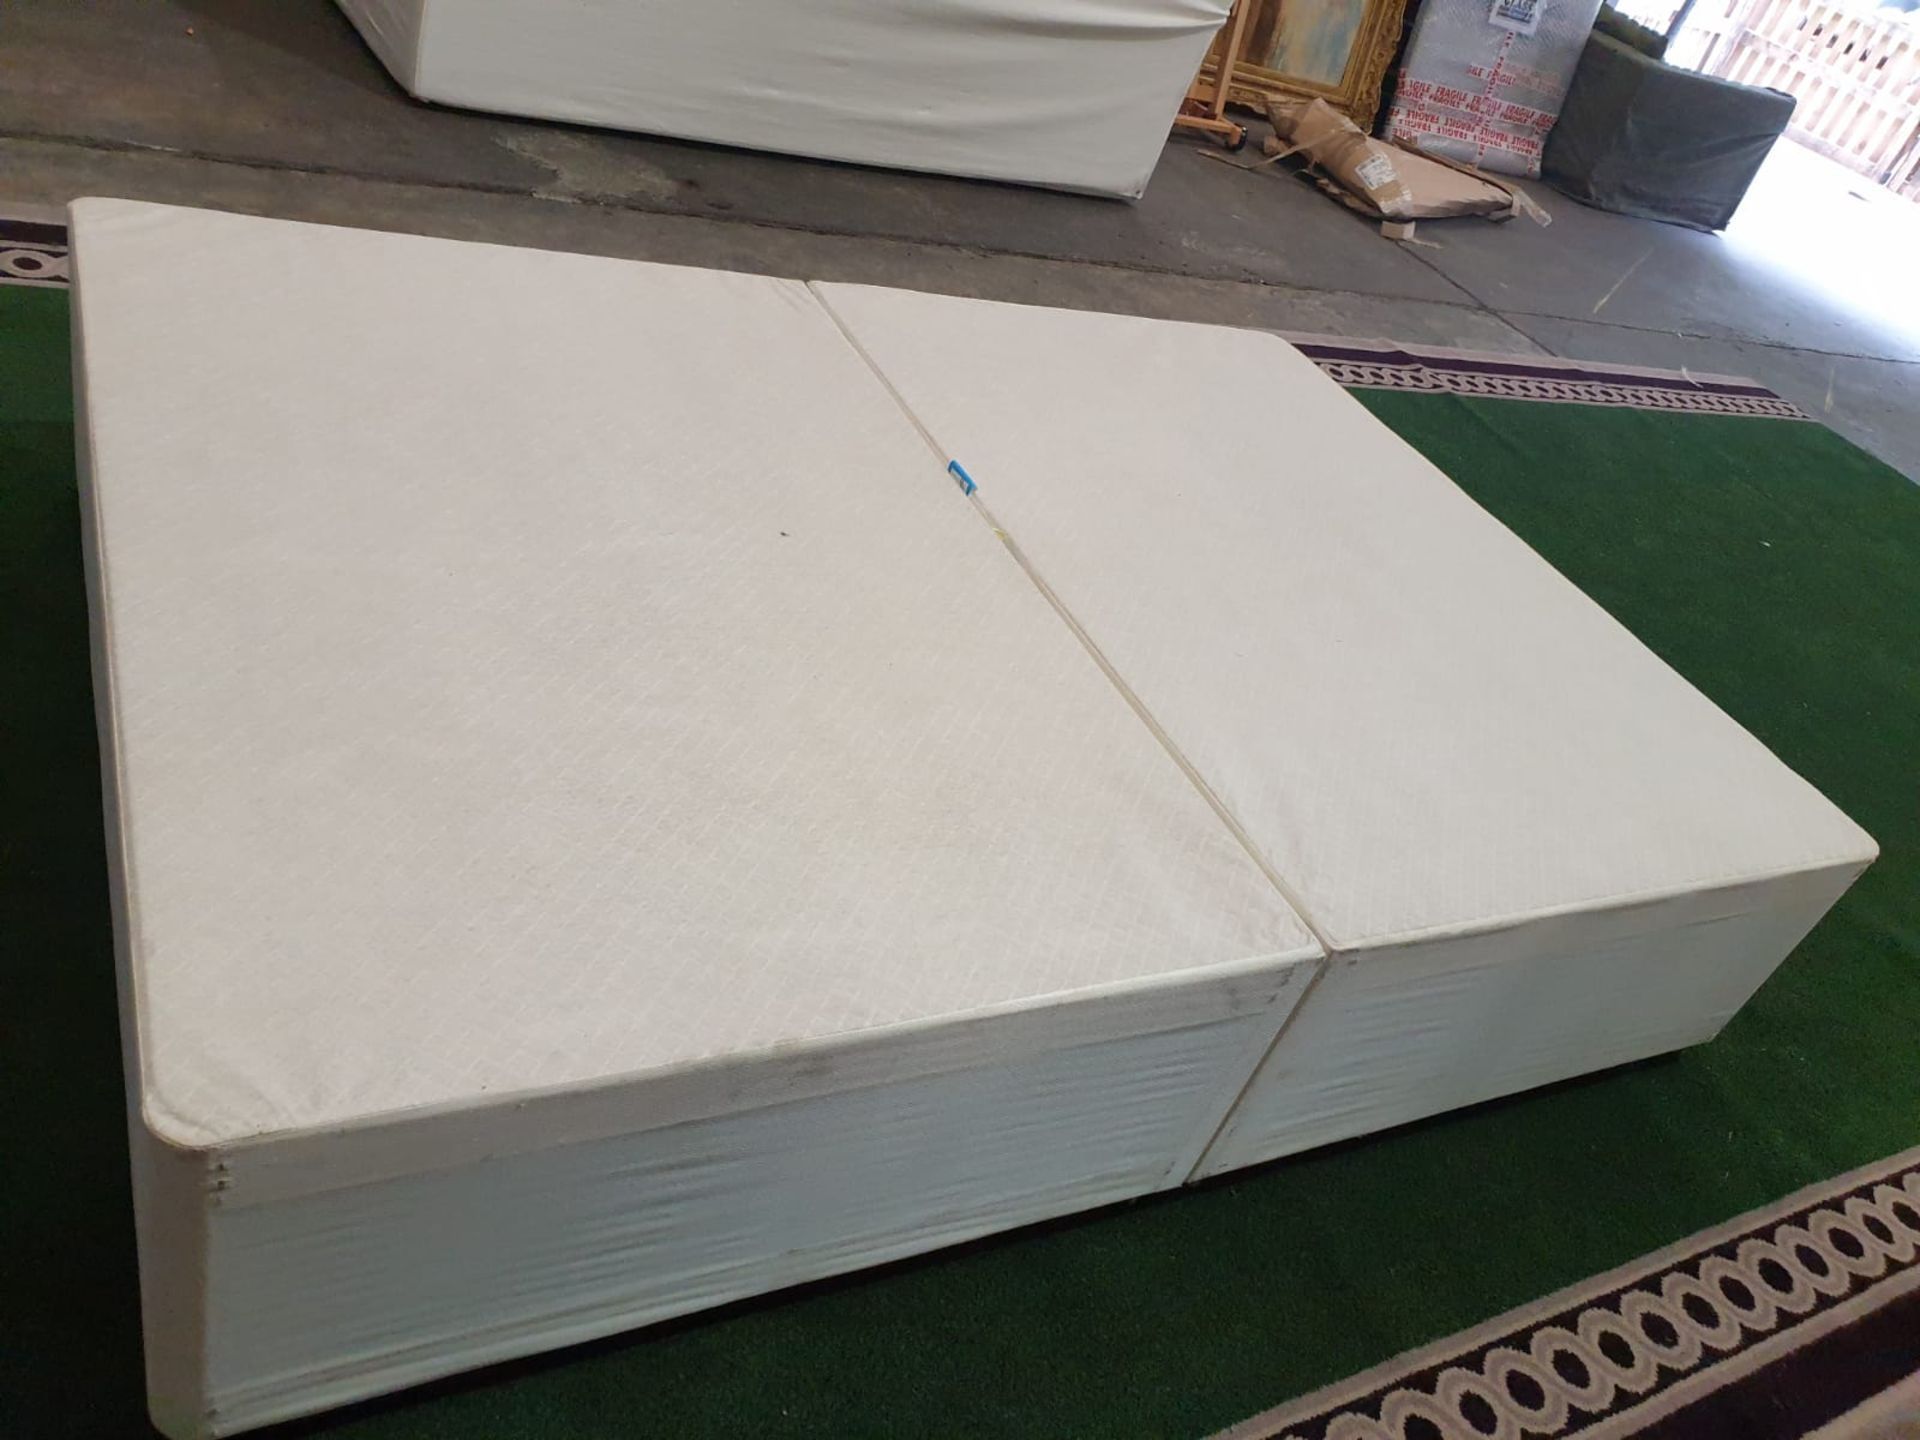 4FT6 Double Bed Base Divan Cream (ST29) - Image 2 of 4